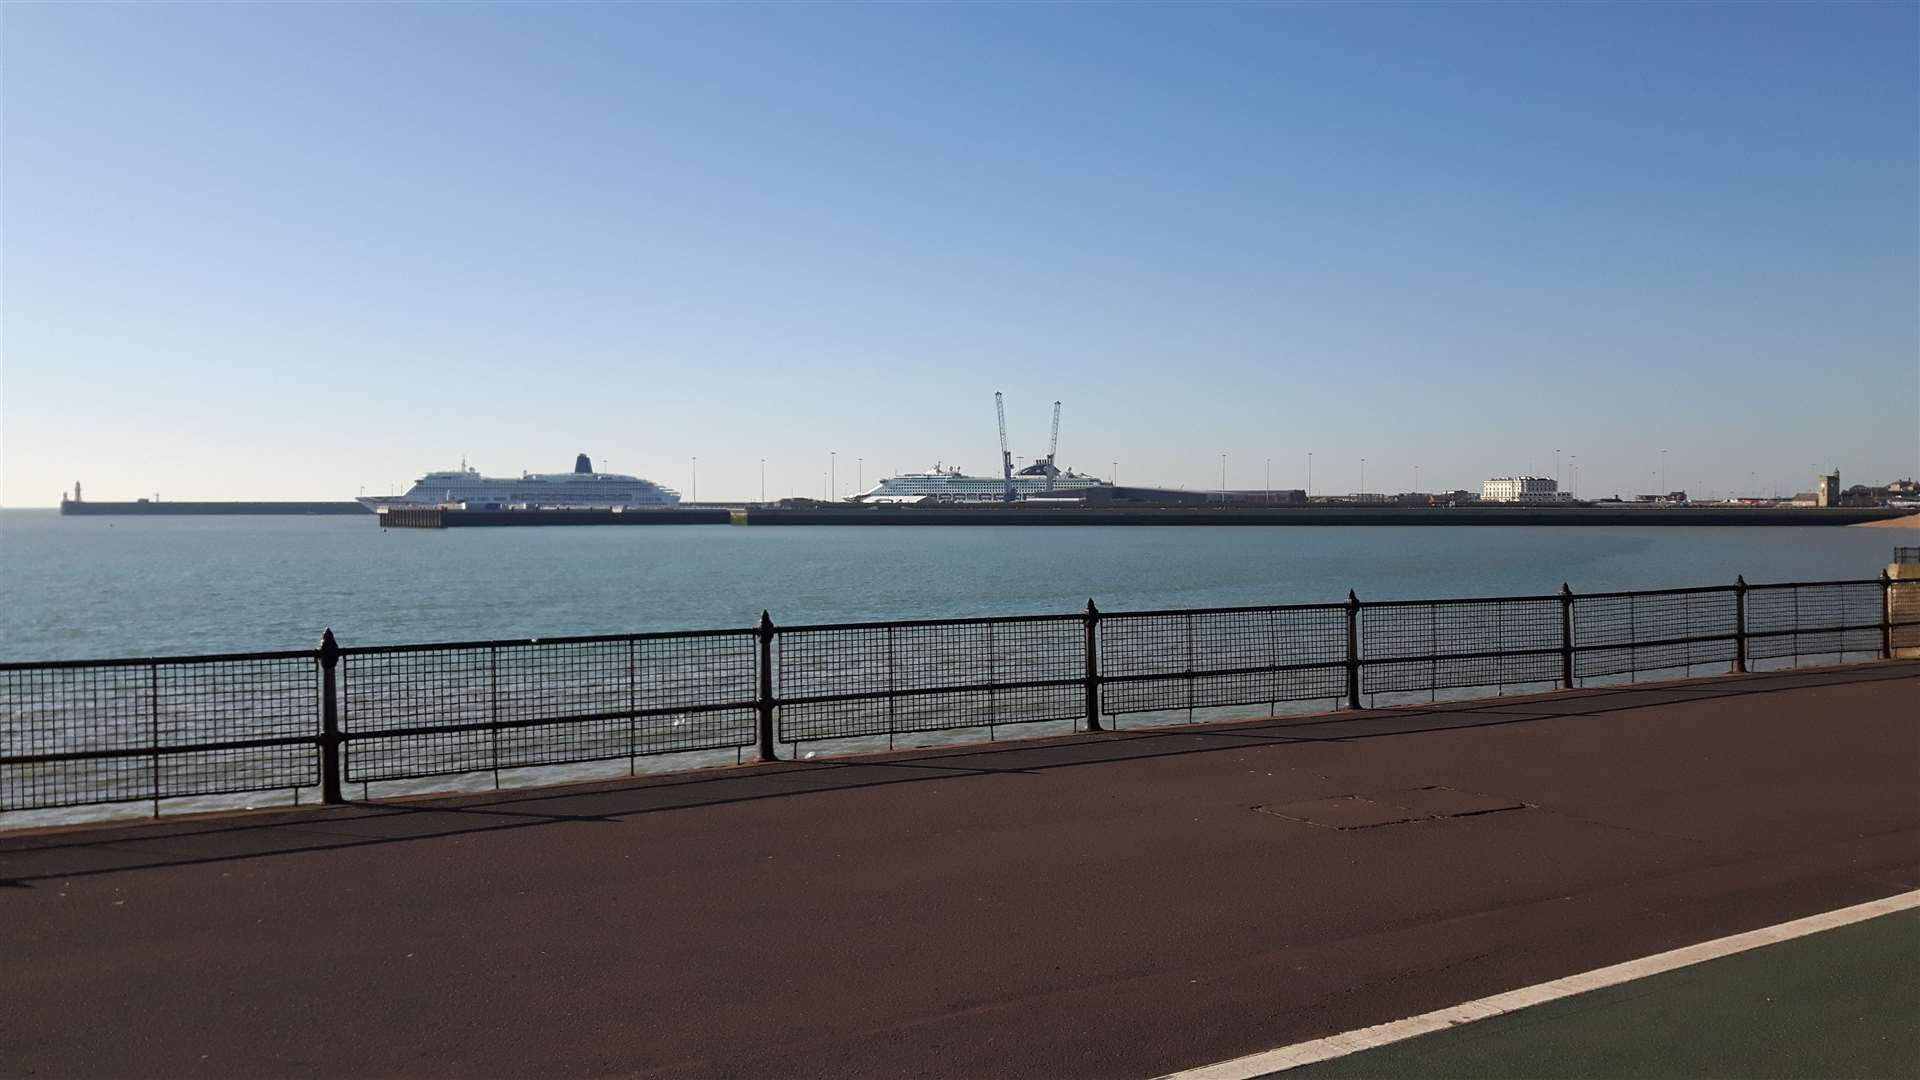 The P&O Oceana and Aurora at the Port of Dover